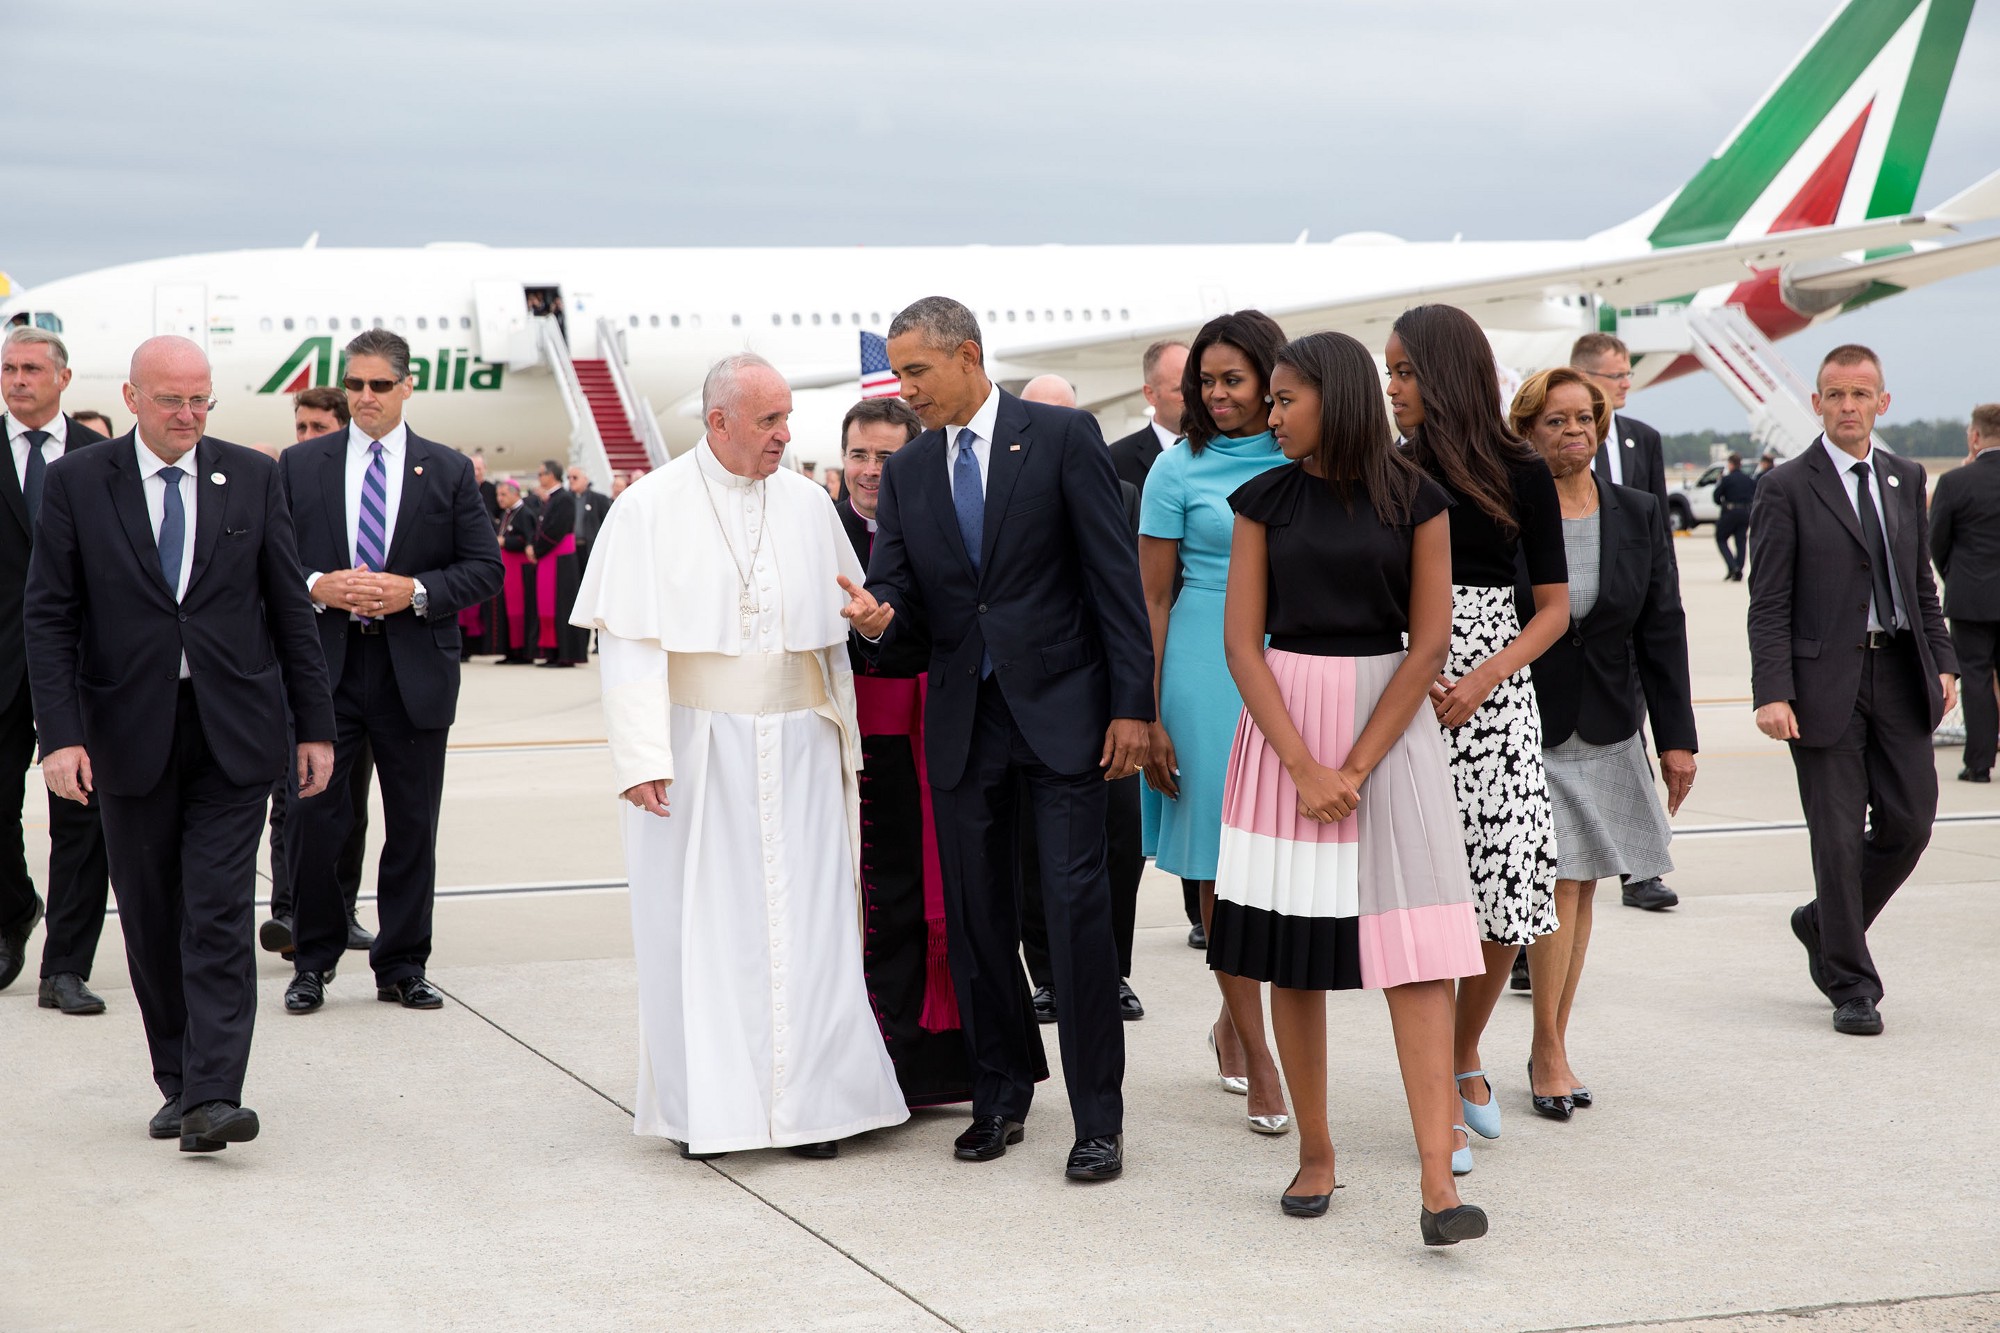 The President and First Family escort Pope Francis from the tarmac. (Official White House Photo by Pete Souza)